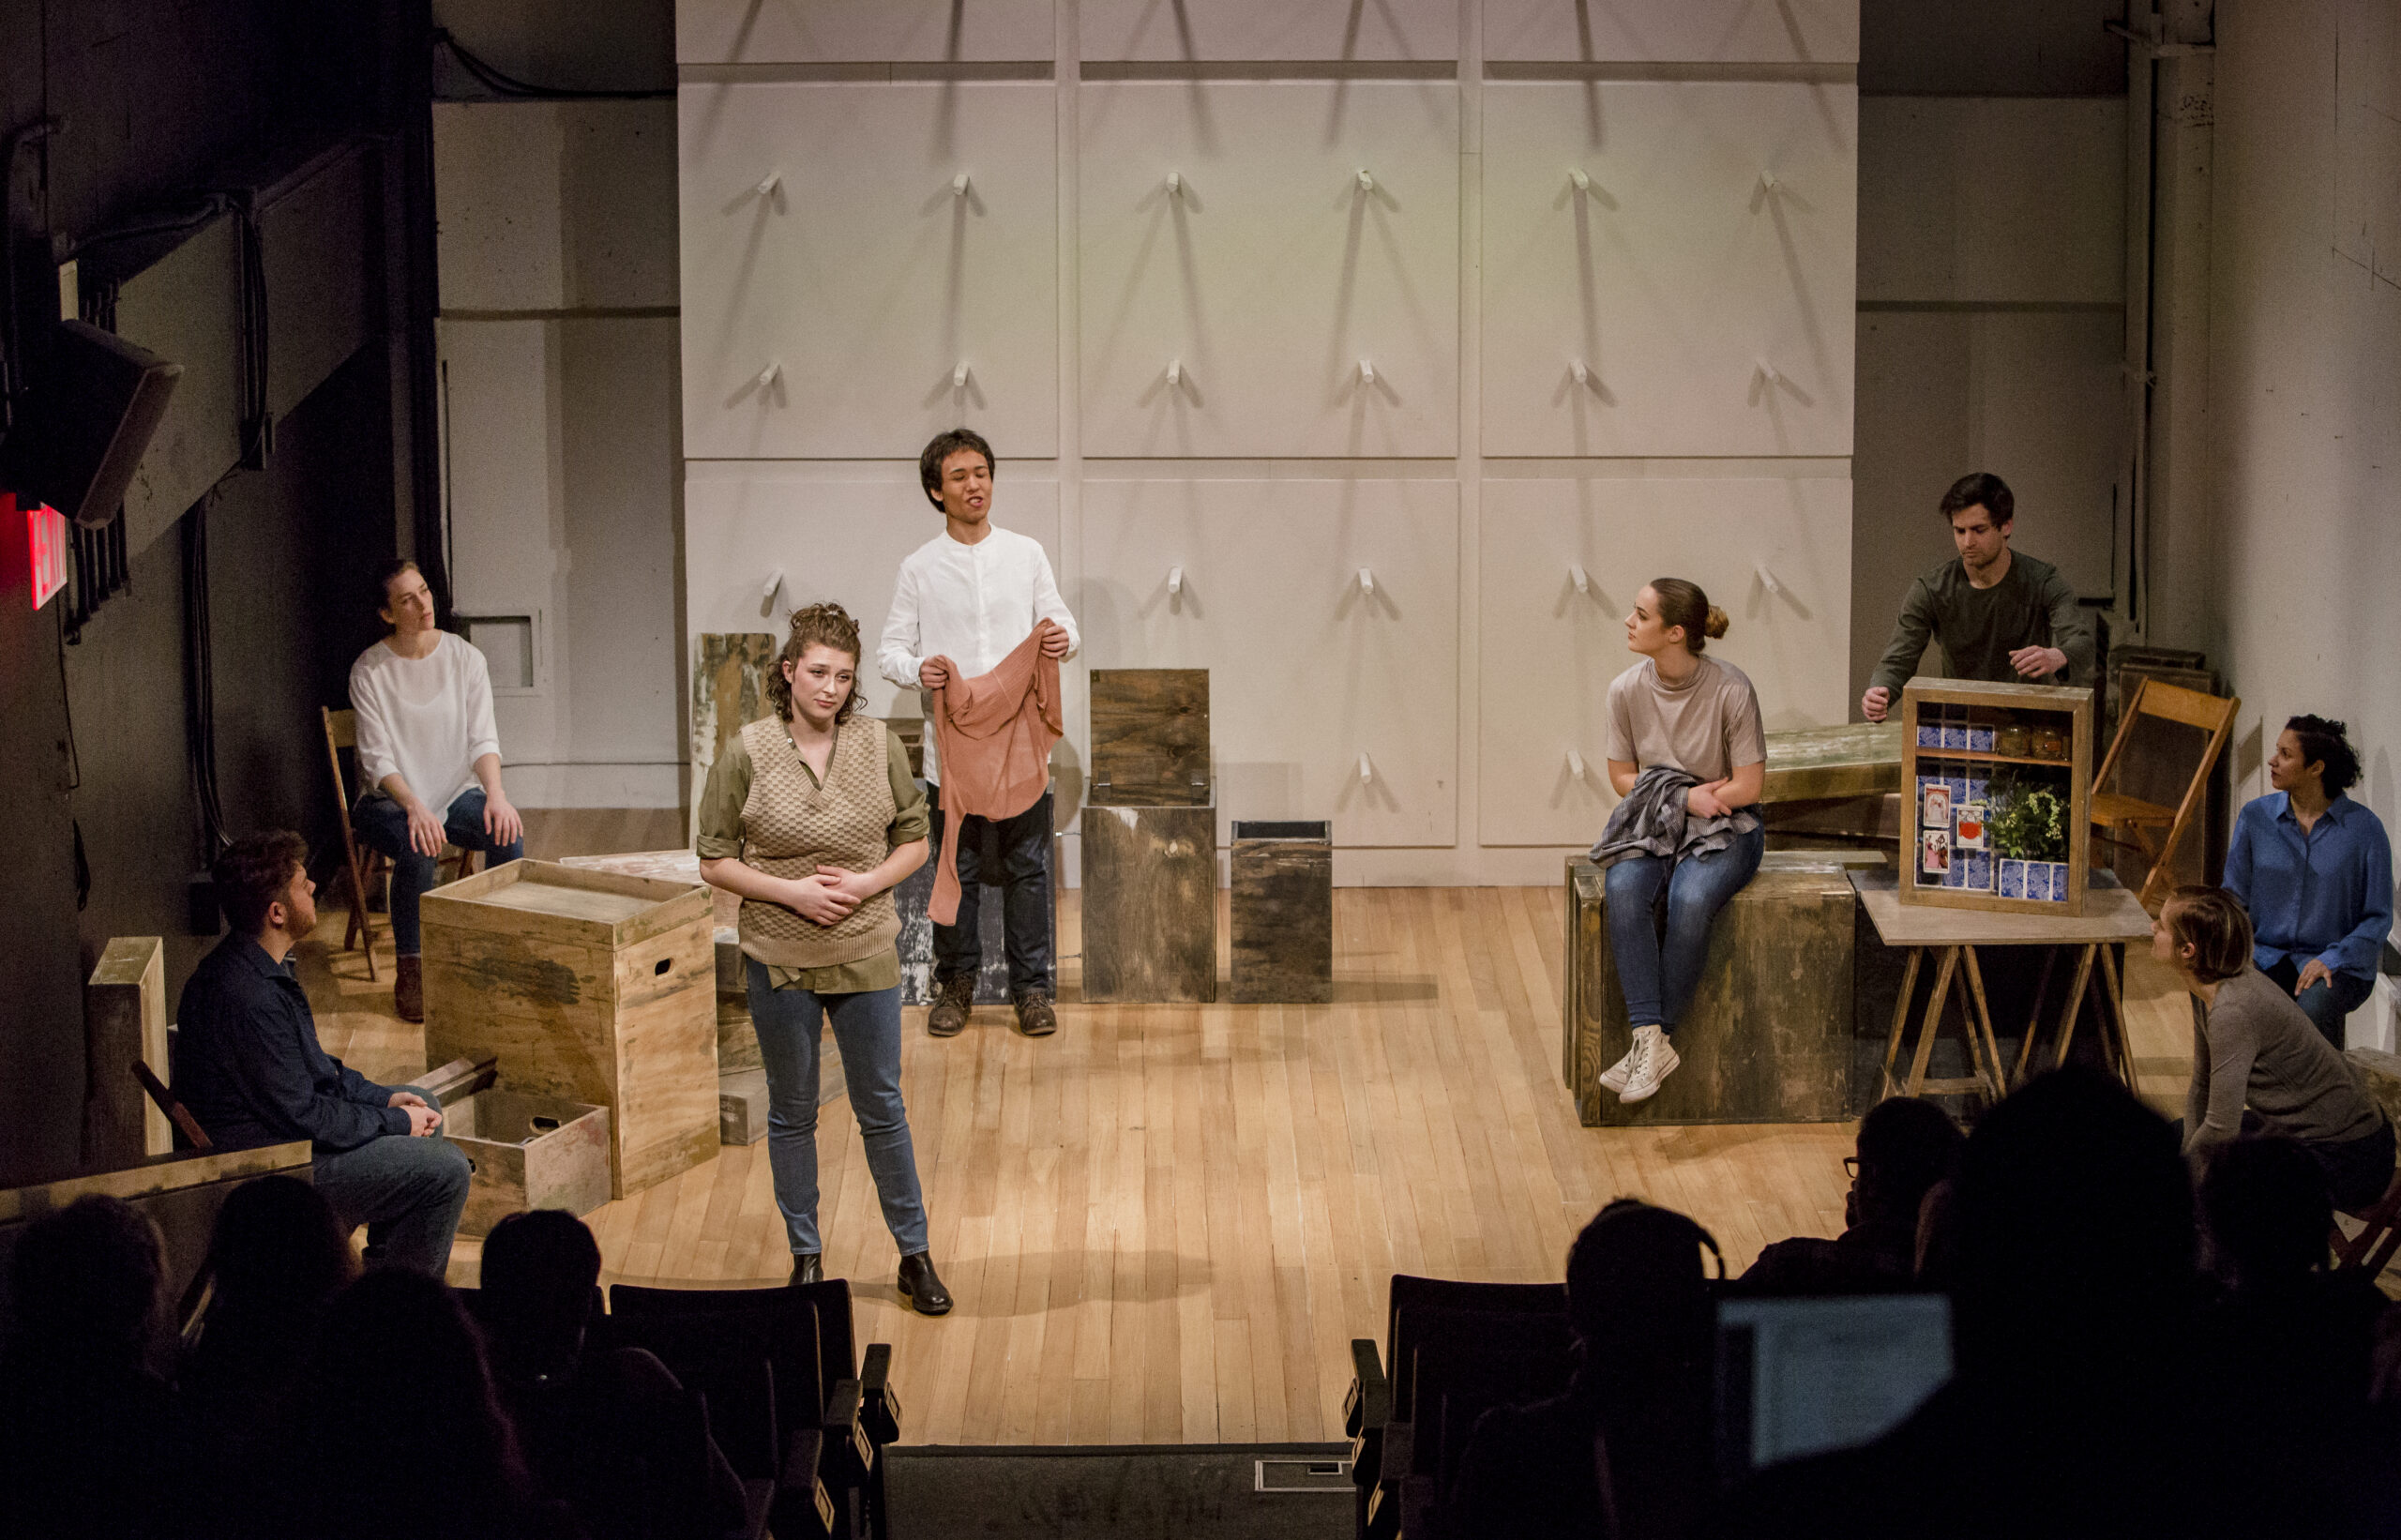 Students onstage performing a play.